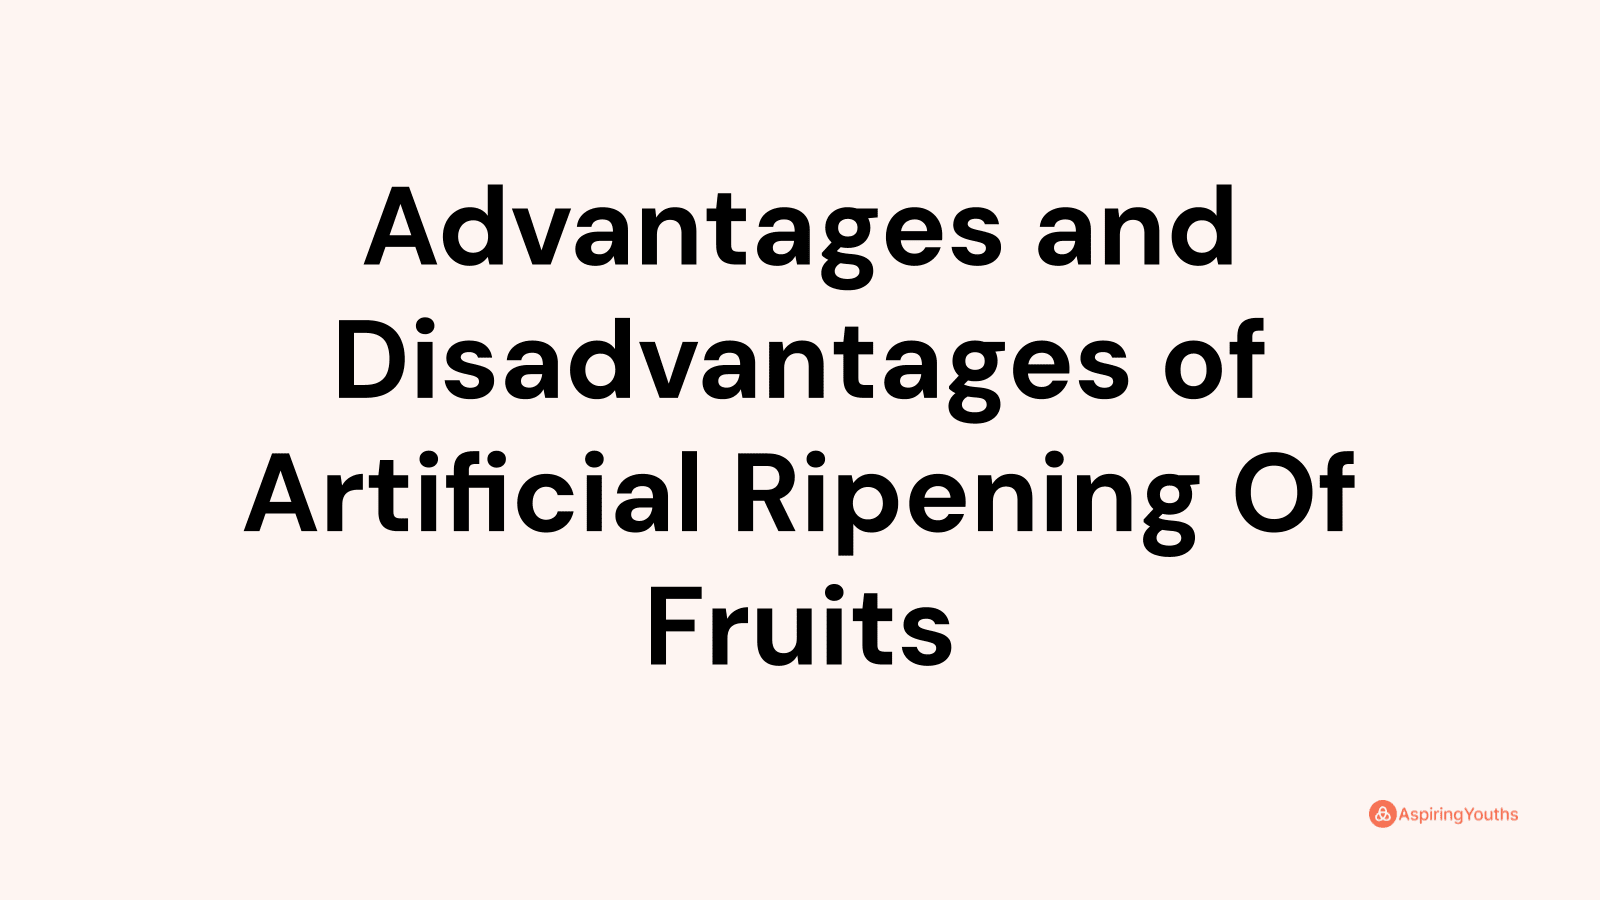 Advantages and disadvantages of Artificial Ripening Of Fruits